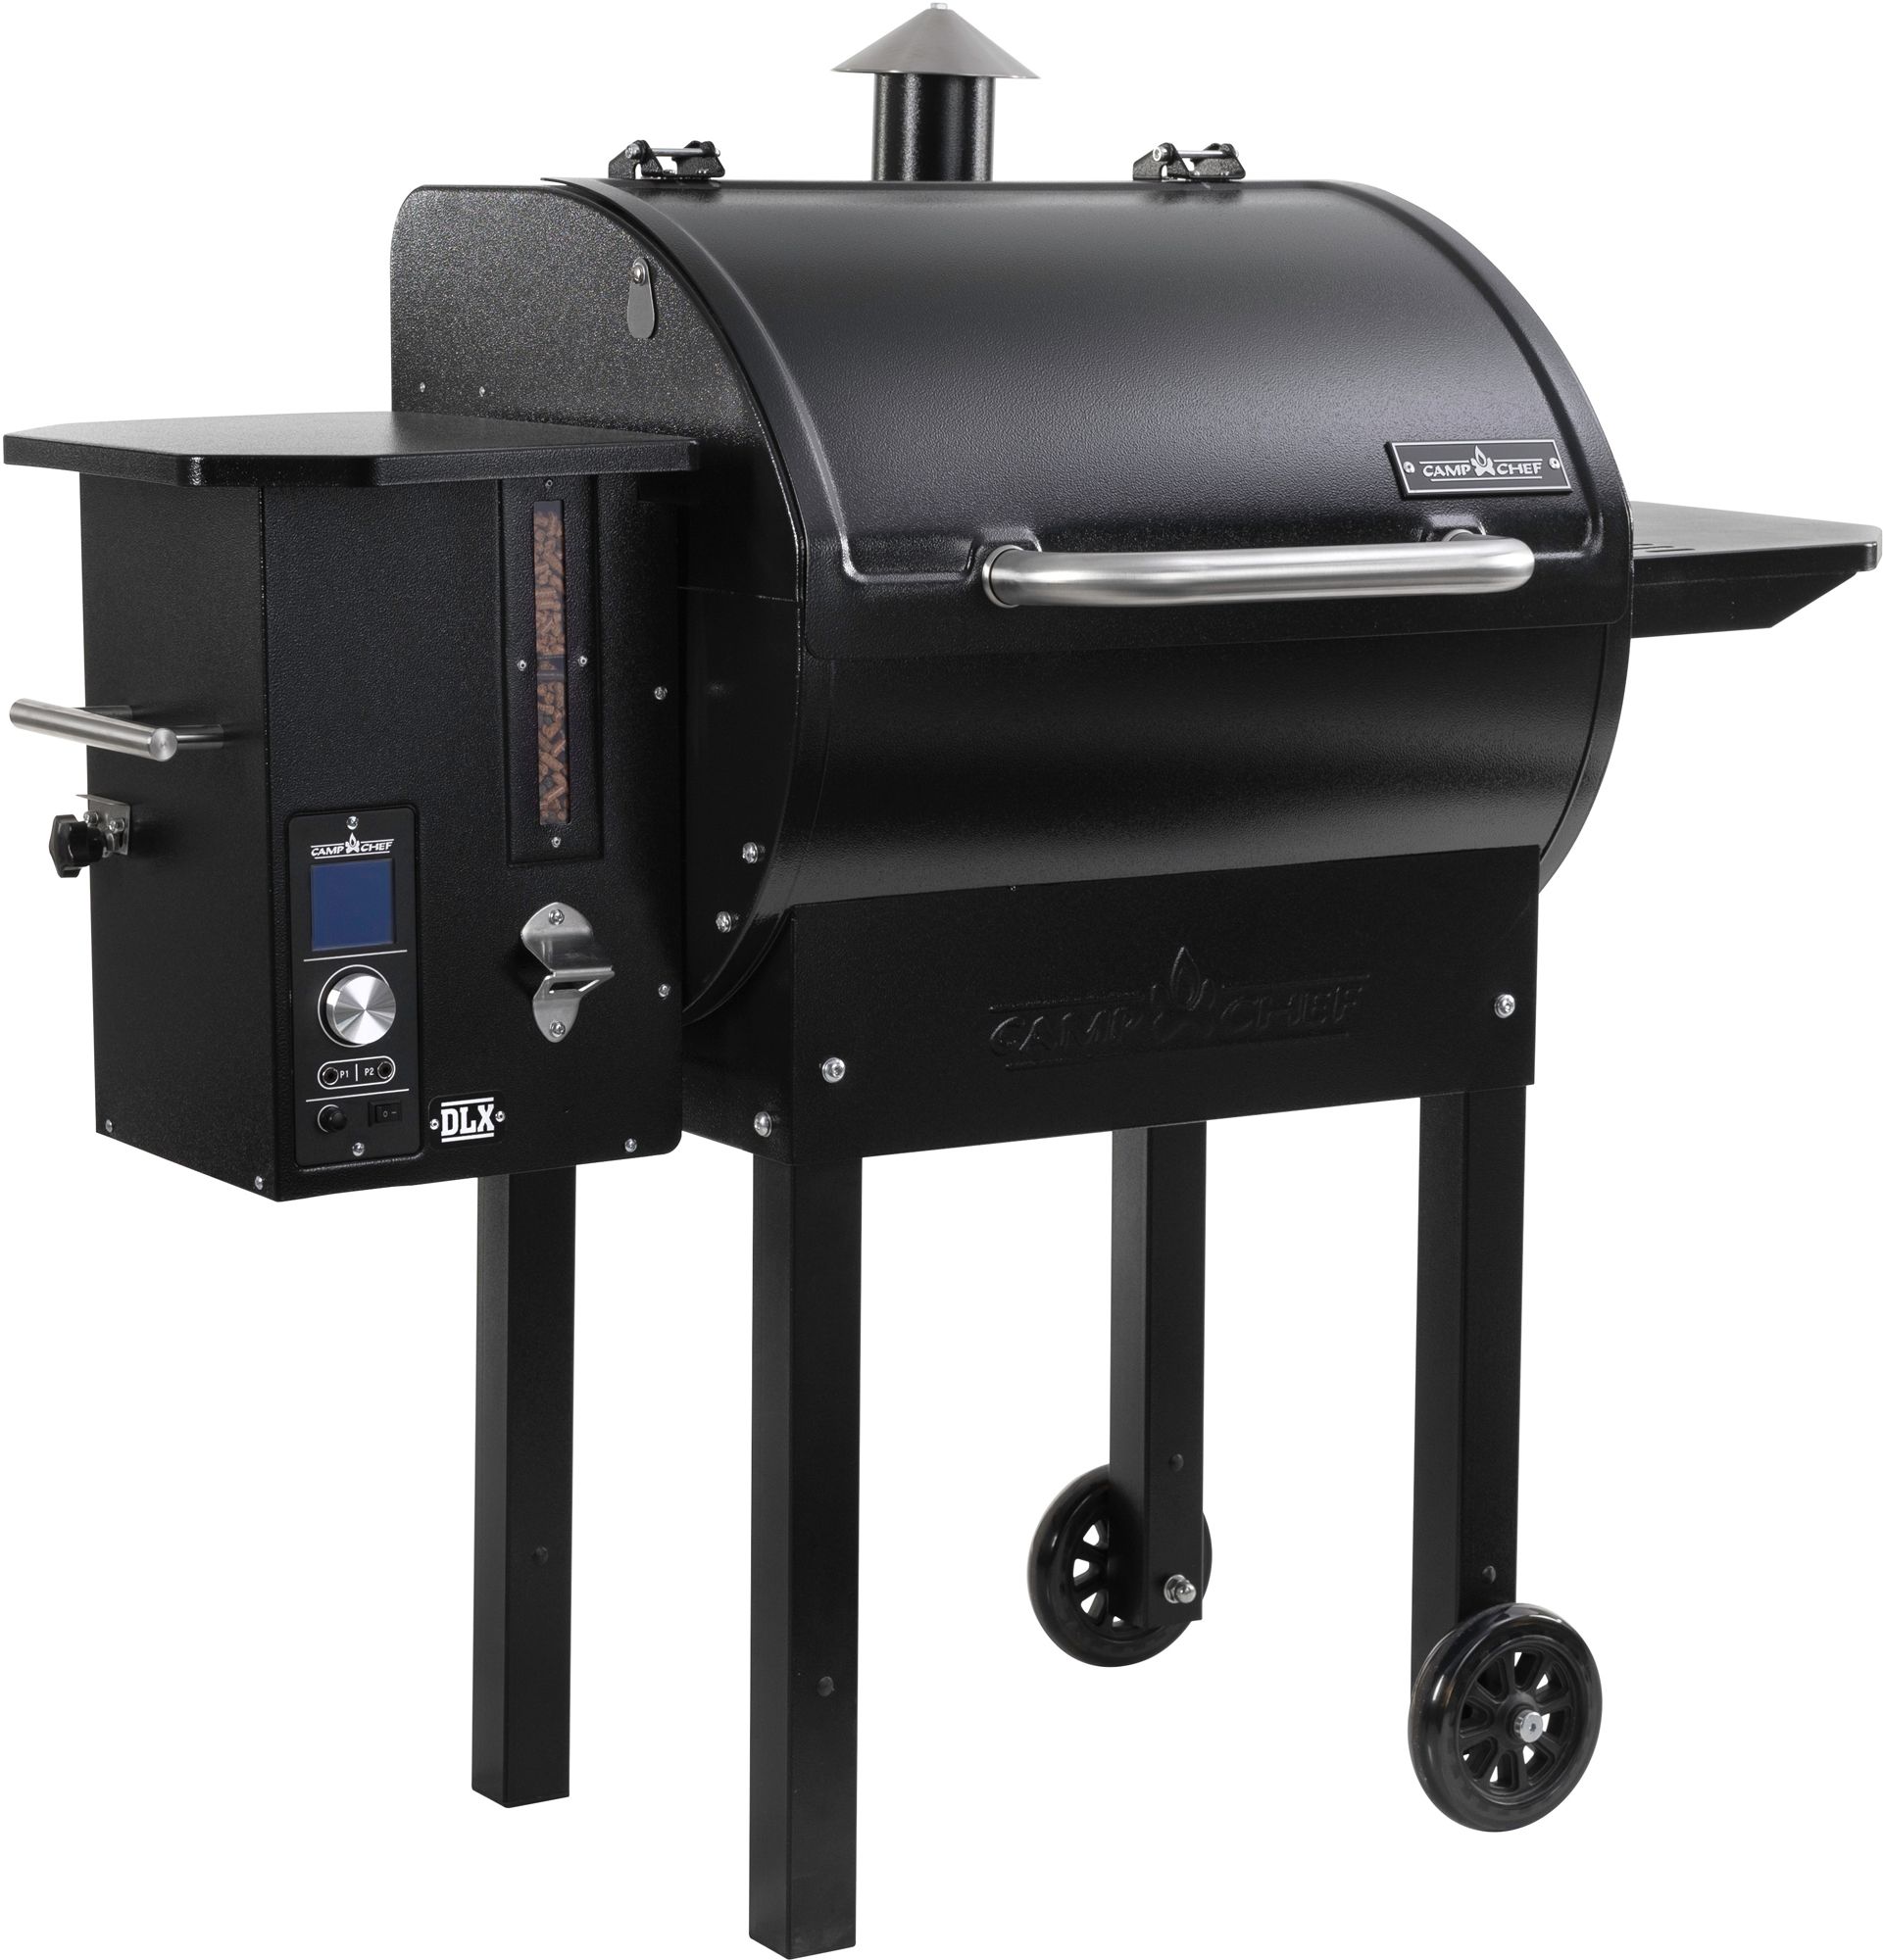 Photos - Knife / Multitool Camp Chef SmokePro DLX Pellet Grill and Smoker 16CCFUSMKPRDLXPLLCFP